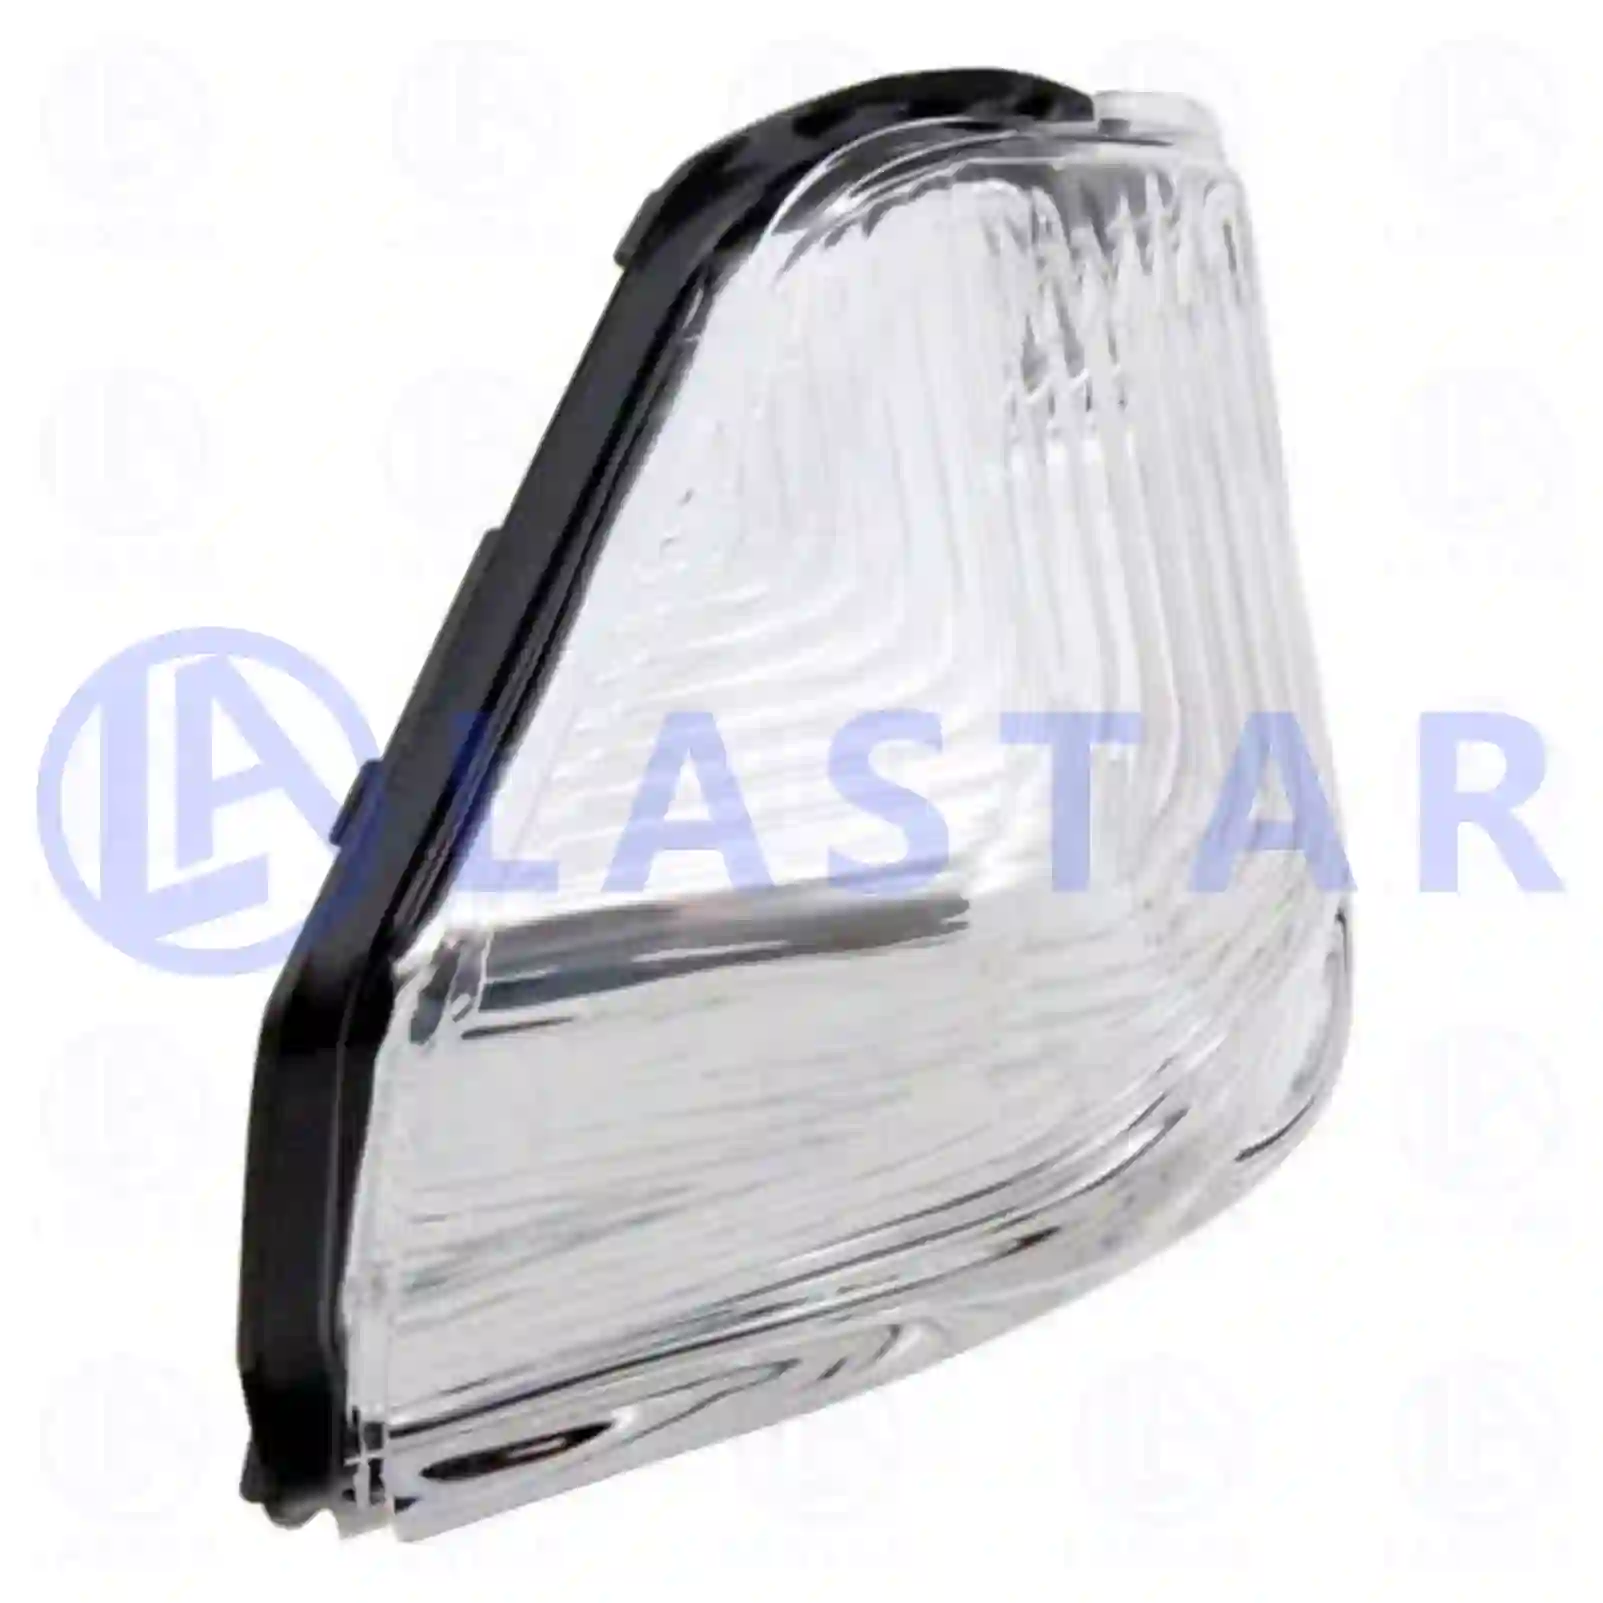 Turn signal lamp, left, with bulb, 77712036, 0018228920, 2E0953049A, ZG21191-0008 ||  77712036 Lastar Spare Part | Truck Spare Parts, Auotomotive Spare Parts Turn signal lamp, left, with bulb, 77712036, 0018228920, 2E0953049A, ZG21191-0008 ||  77712036 Lastar Spare Part | Truck Spare Parts, Auotomotive Spare Parts